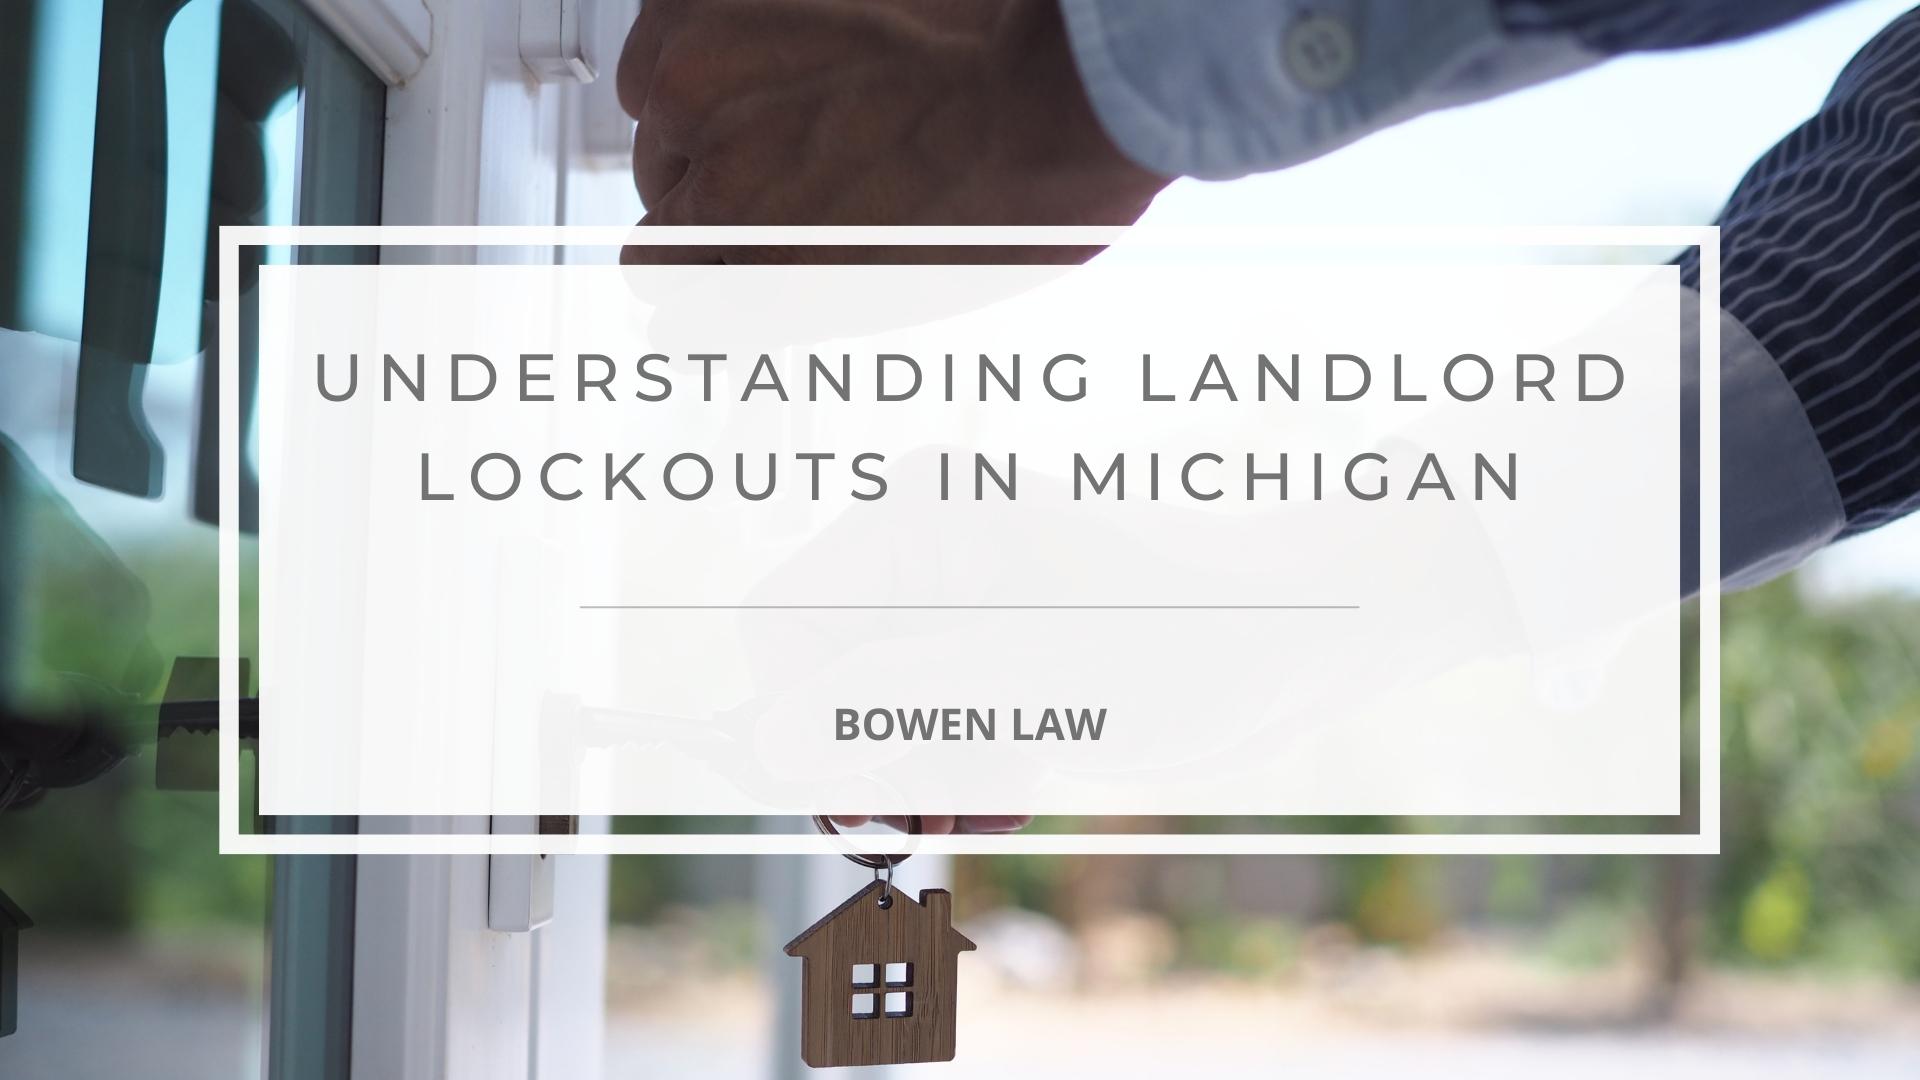 Featured image of understanding landlord lockouts in michigan